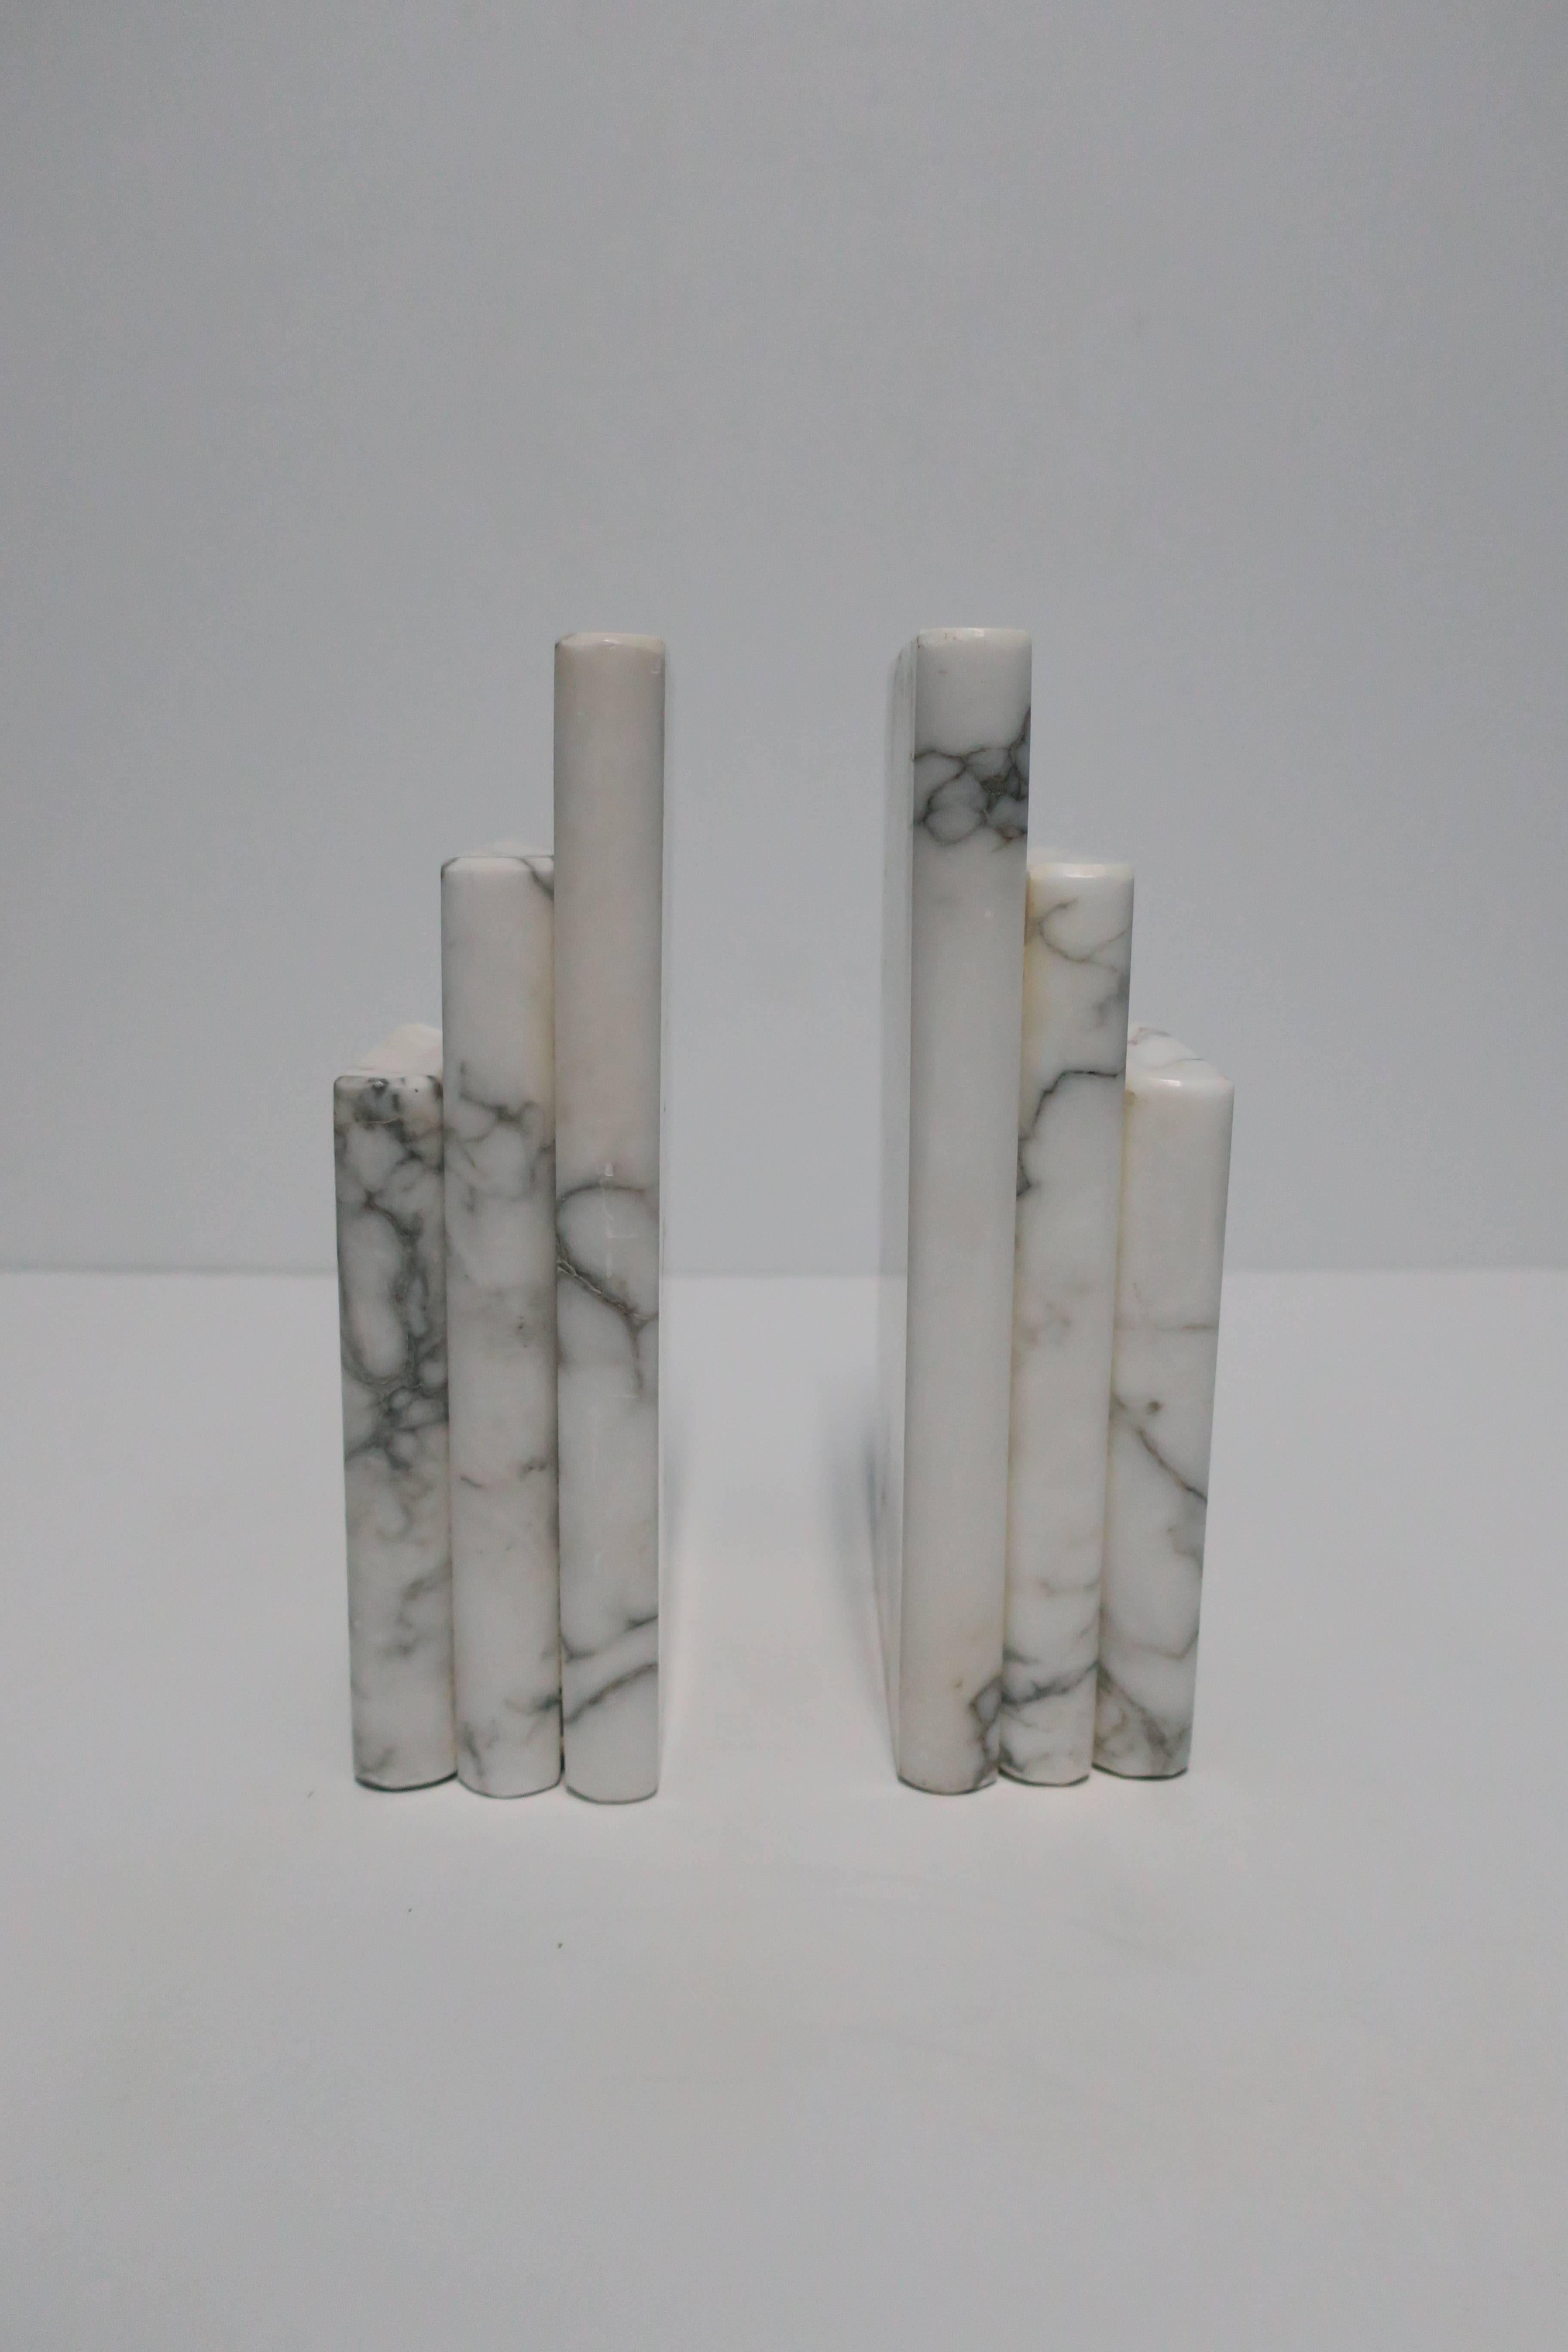 A beautiful and substantial pair of vintage Modern Italian white and black marble 'Book' bookends, Italy, circa 1970s. Marble is predominantly white with black/dark veining. Bookends are substantial; in images #9 and #10 they are shown supporting